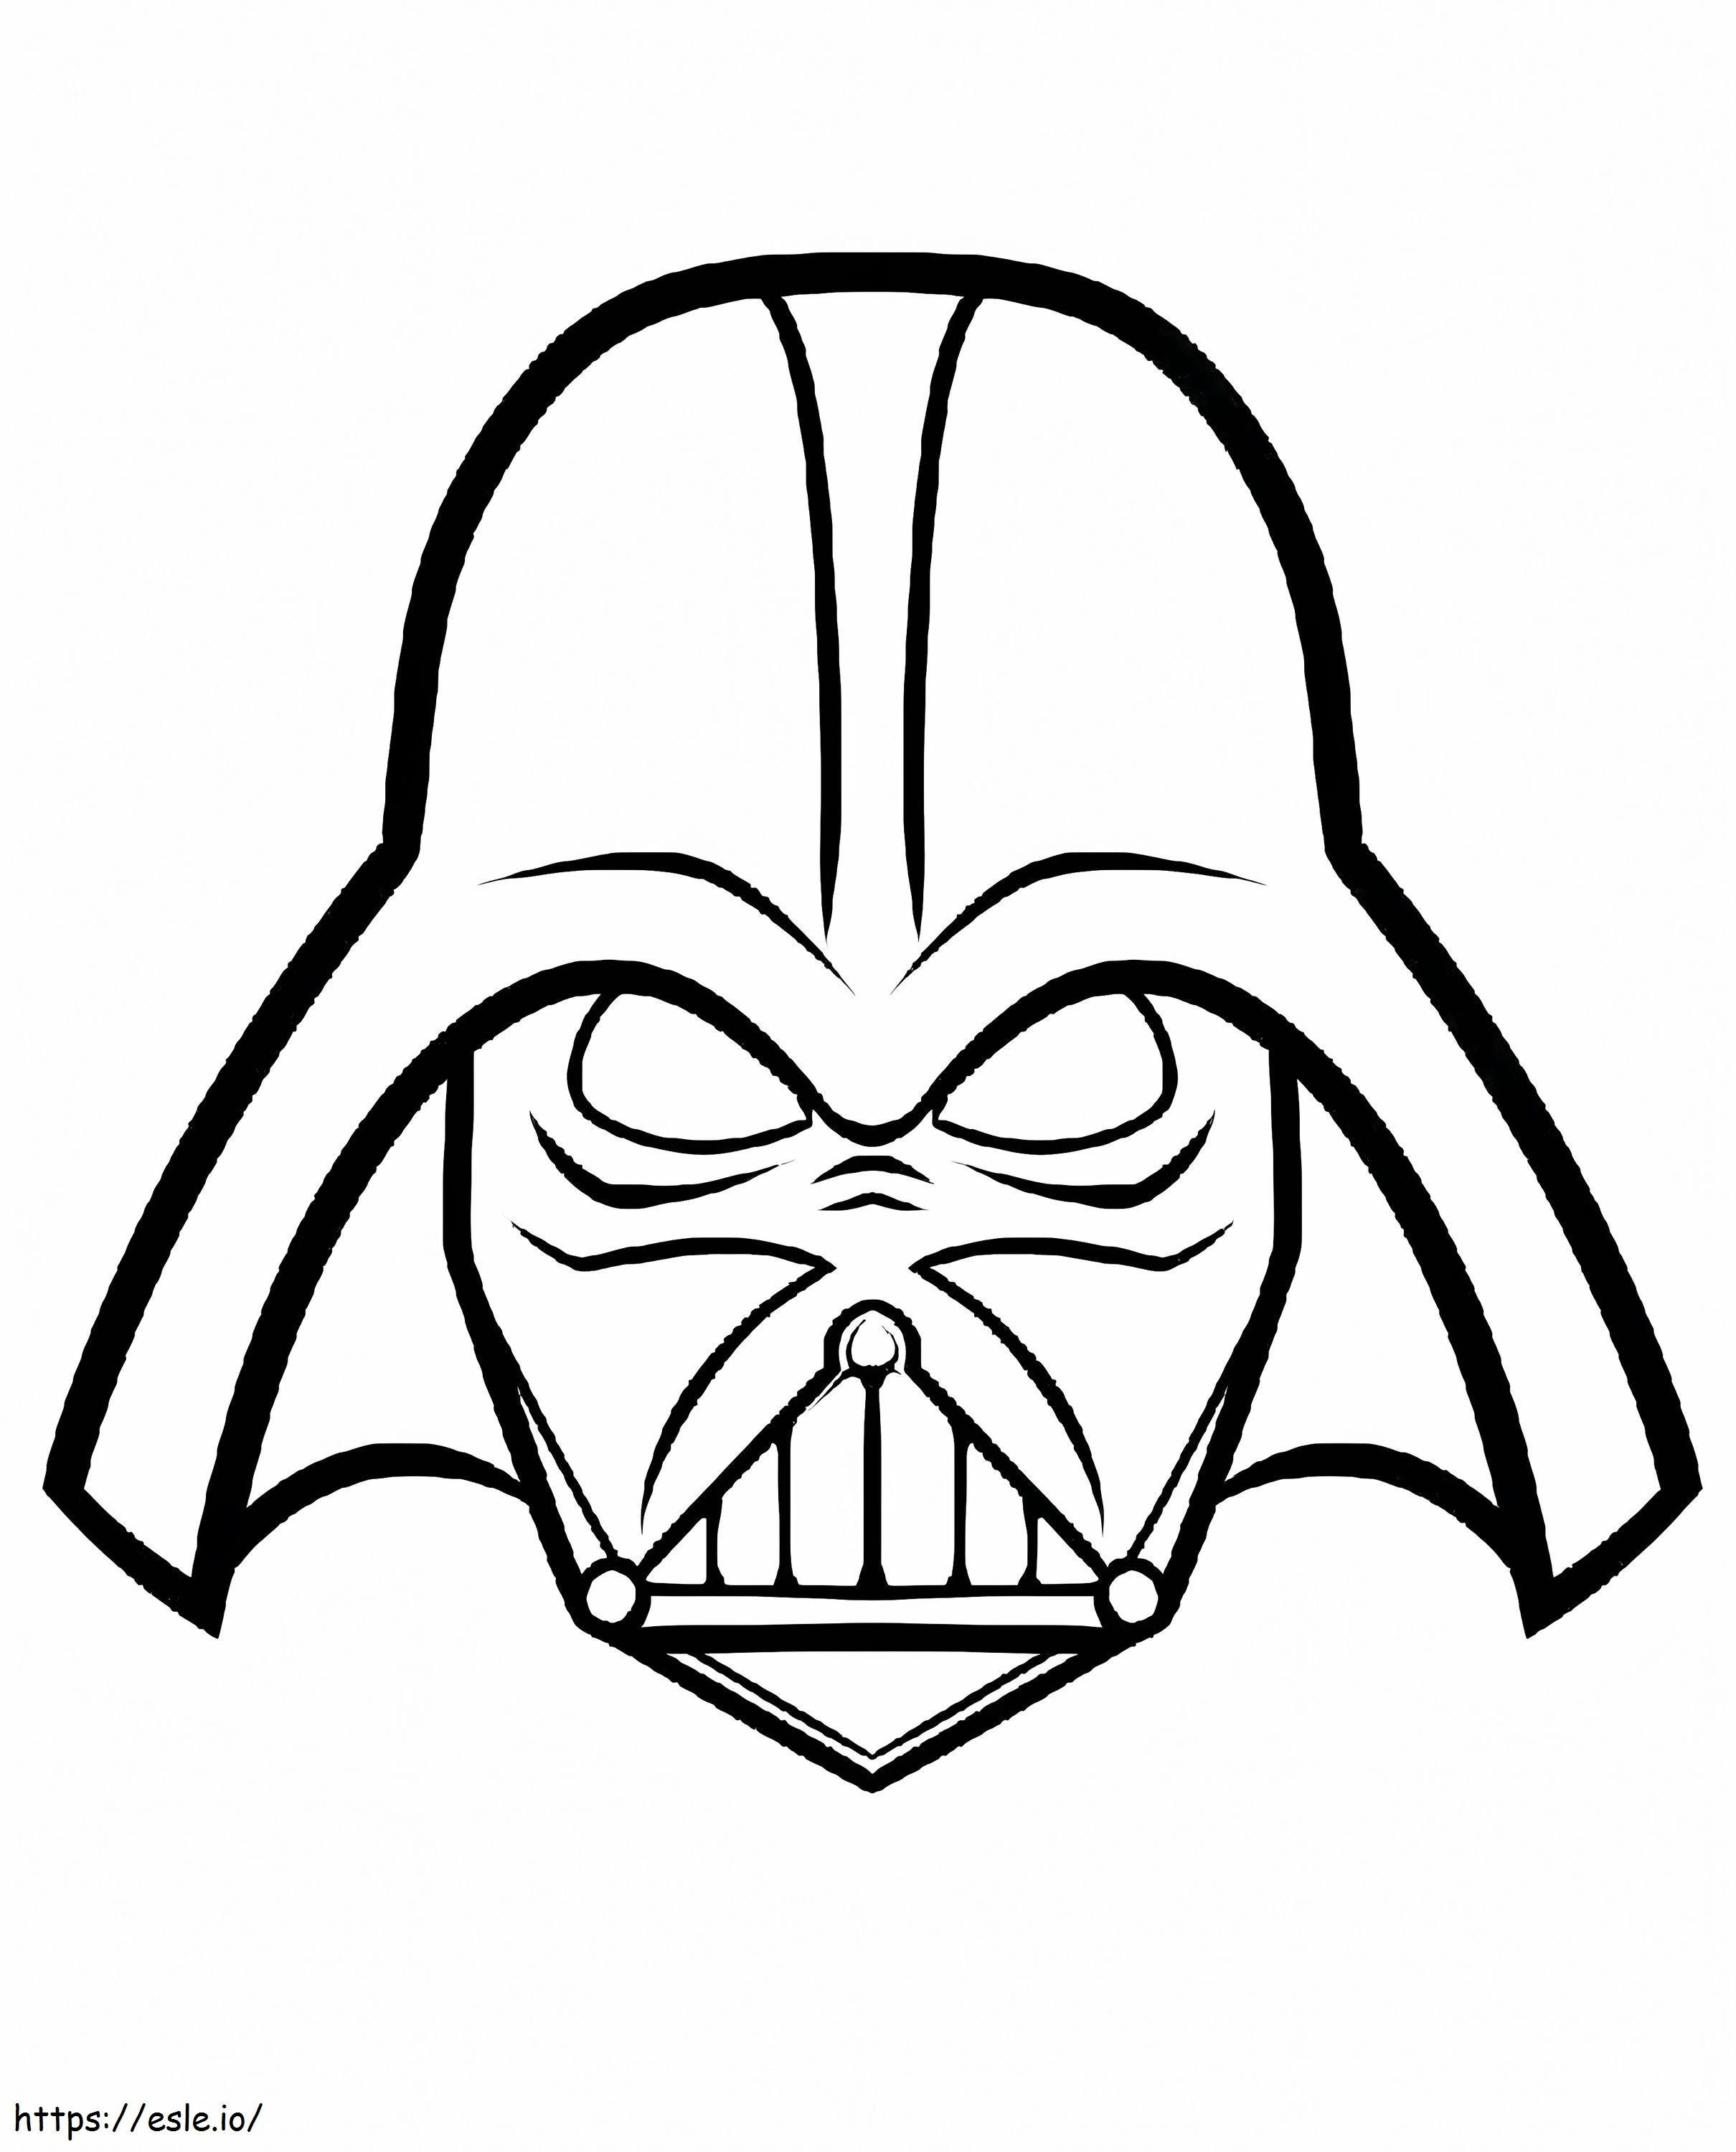 Star Wars Darth Vader Coloring Pictures For Printable Coloring Star Wars Angry Birds Star Wars Darth Vader coloring page